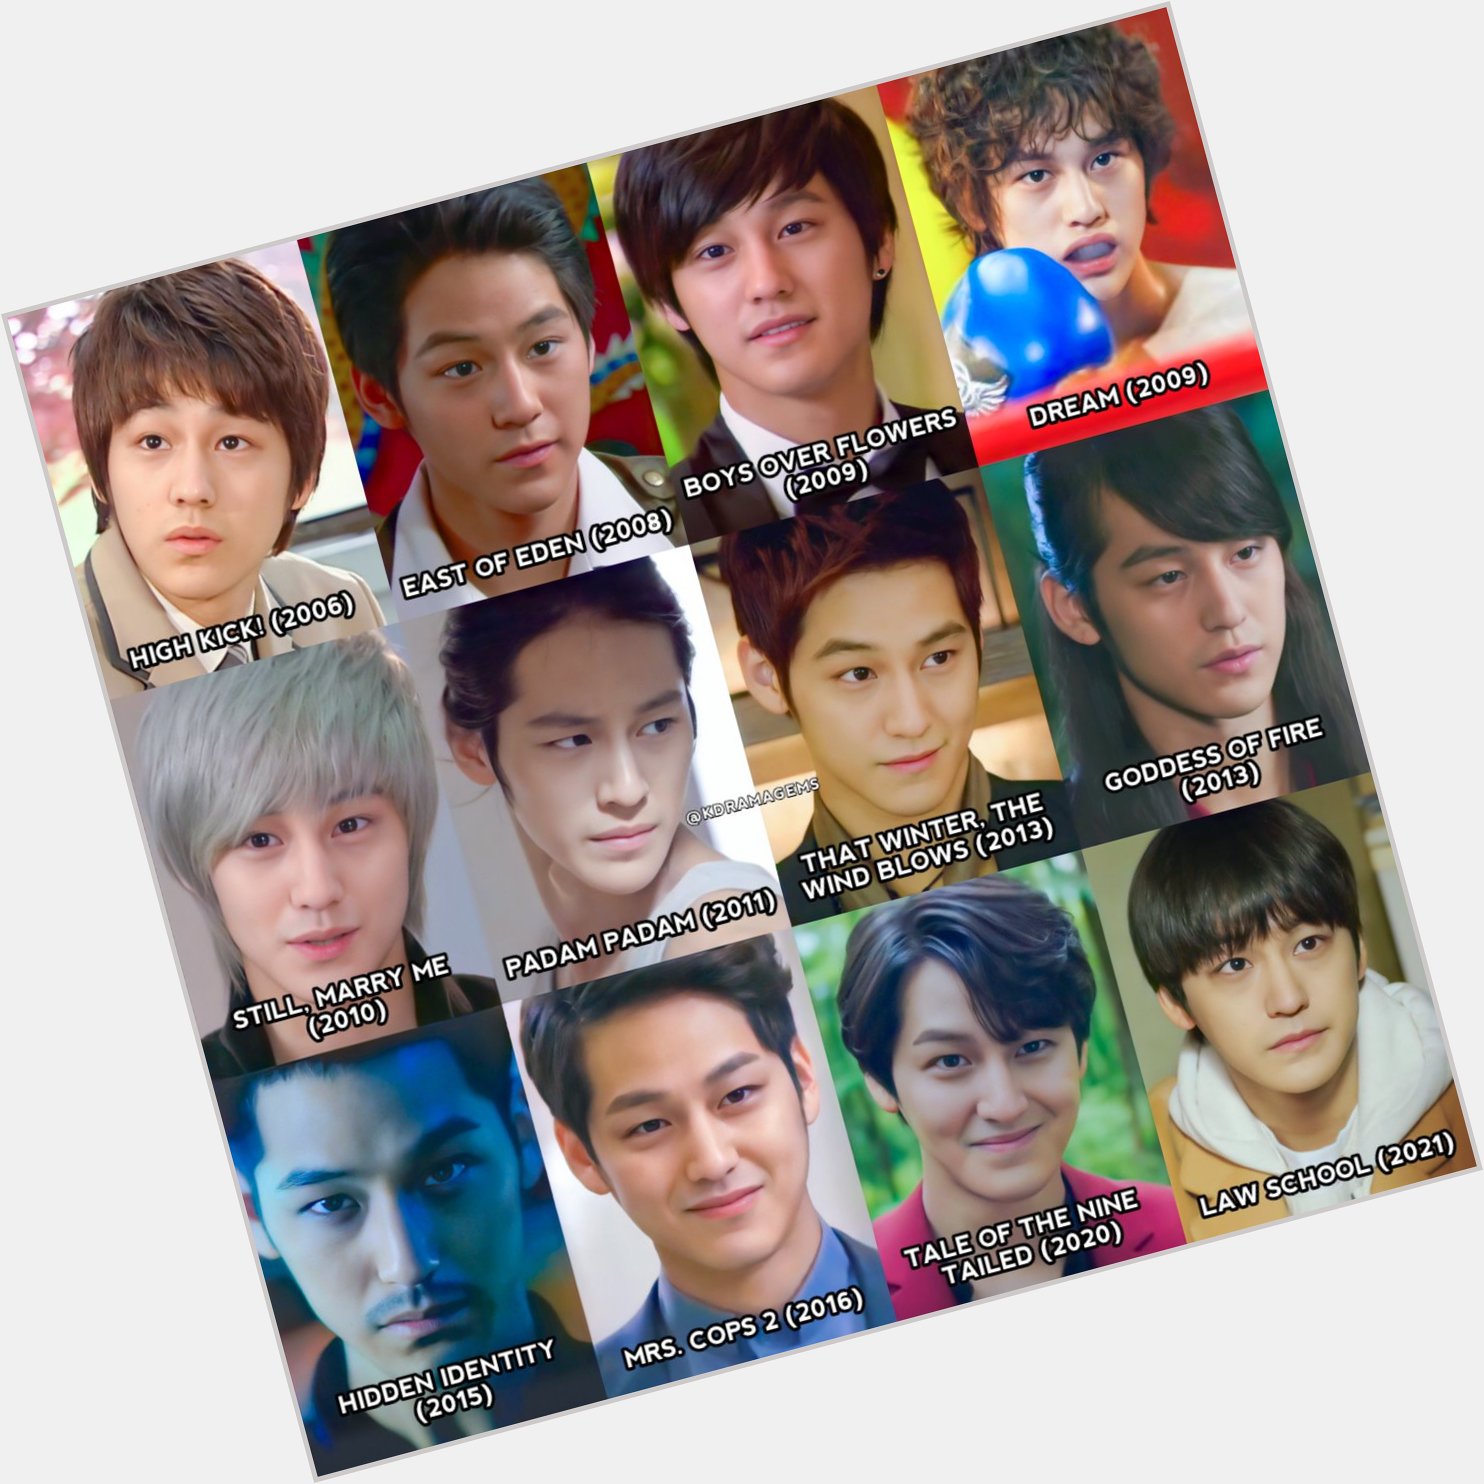 HAPPY BIRTHDAY, KIM BUM  !!! (July 7, 1989)

When\s the first time you saw him? 